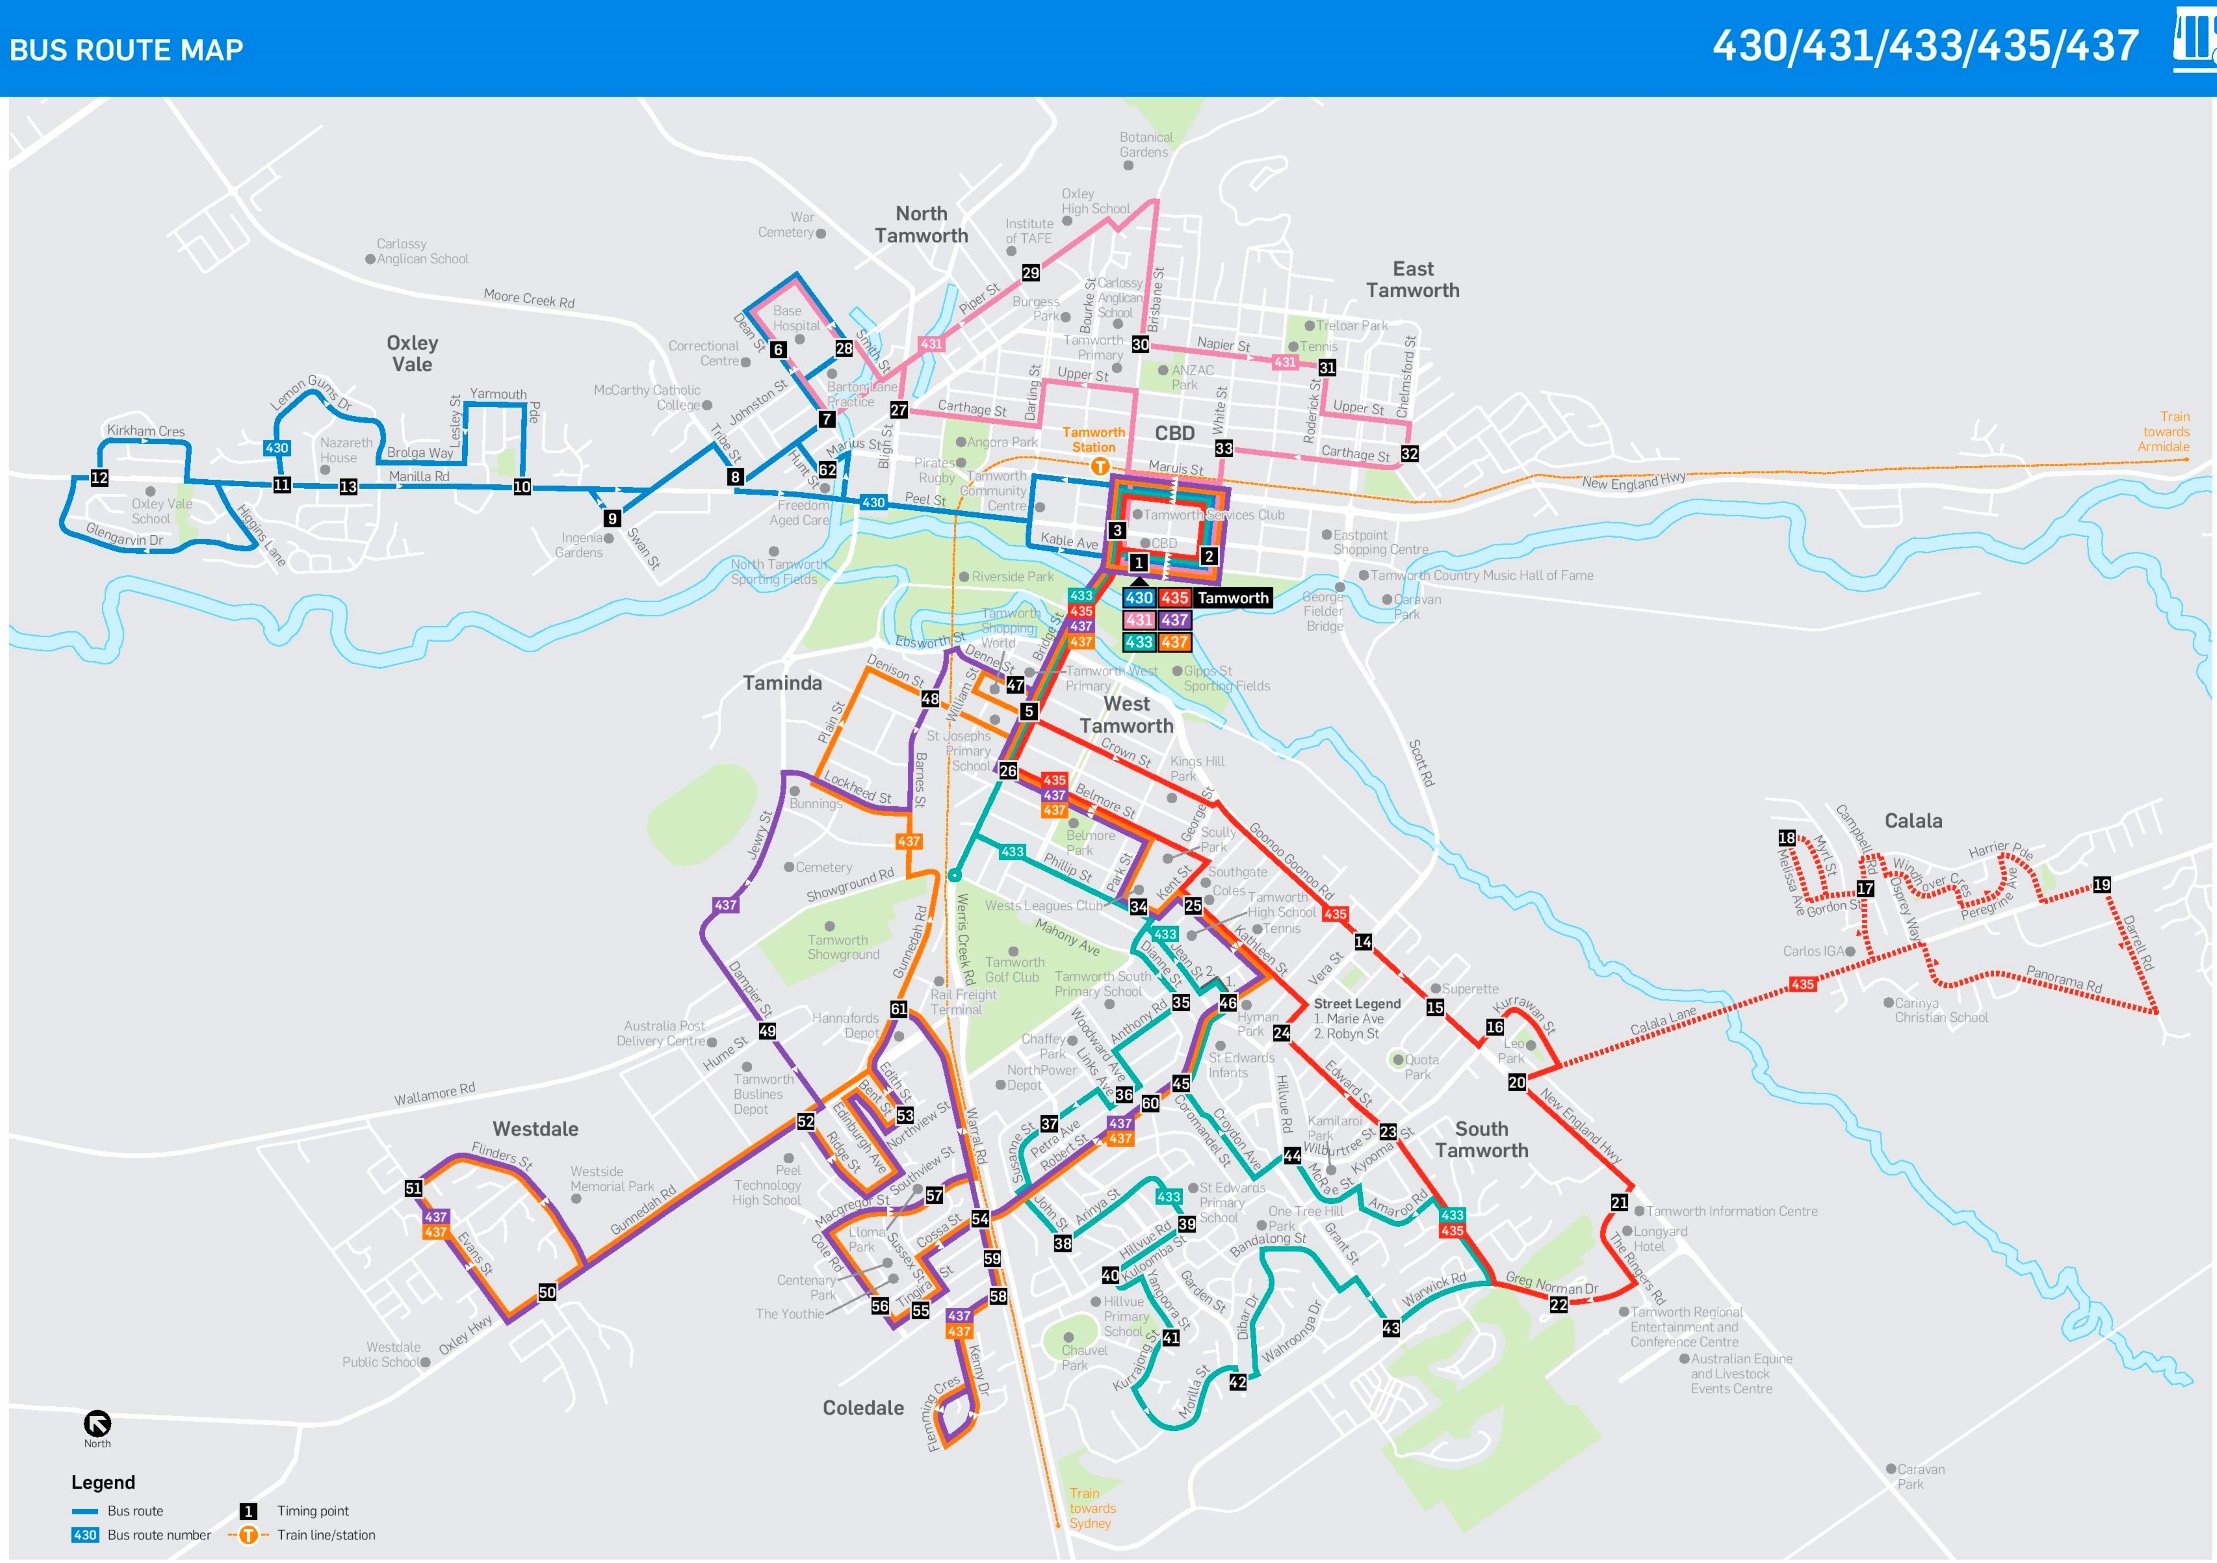 Description: This map shows bus routes and stops in Tamworth. 